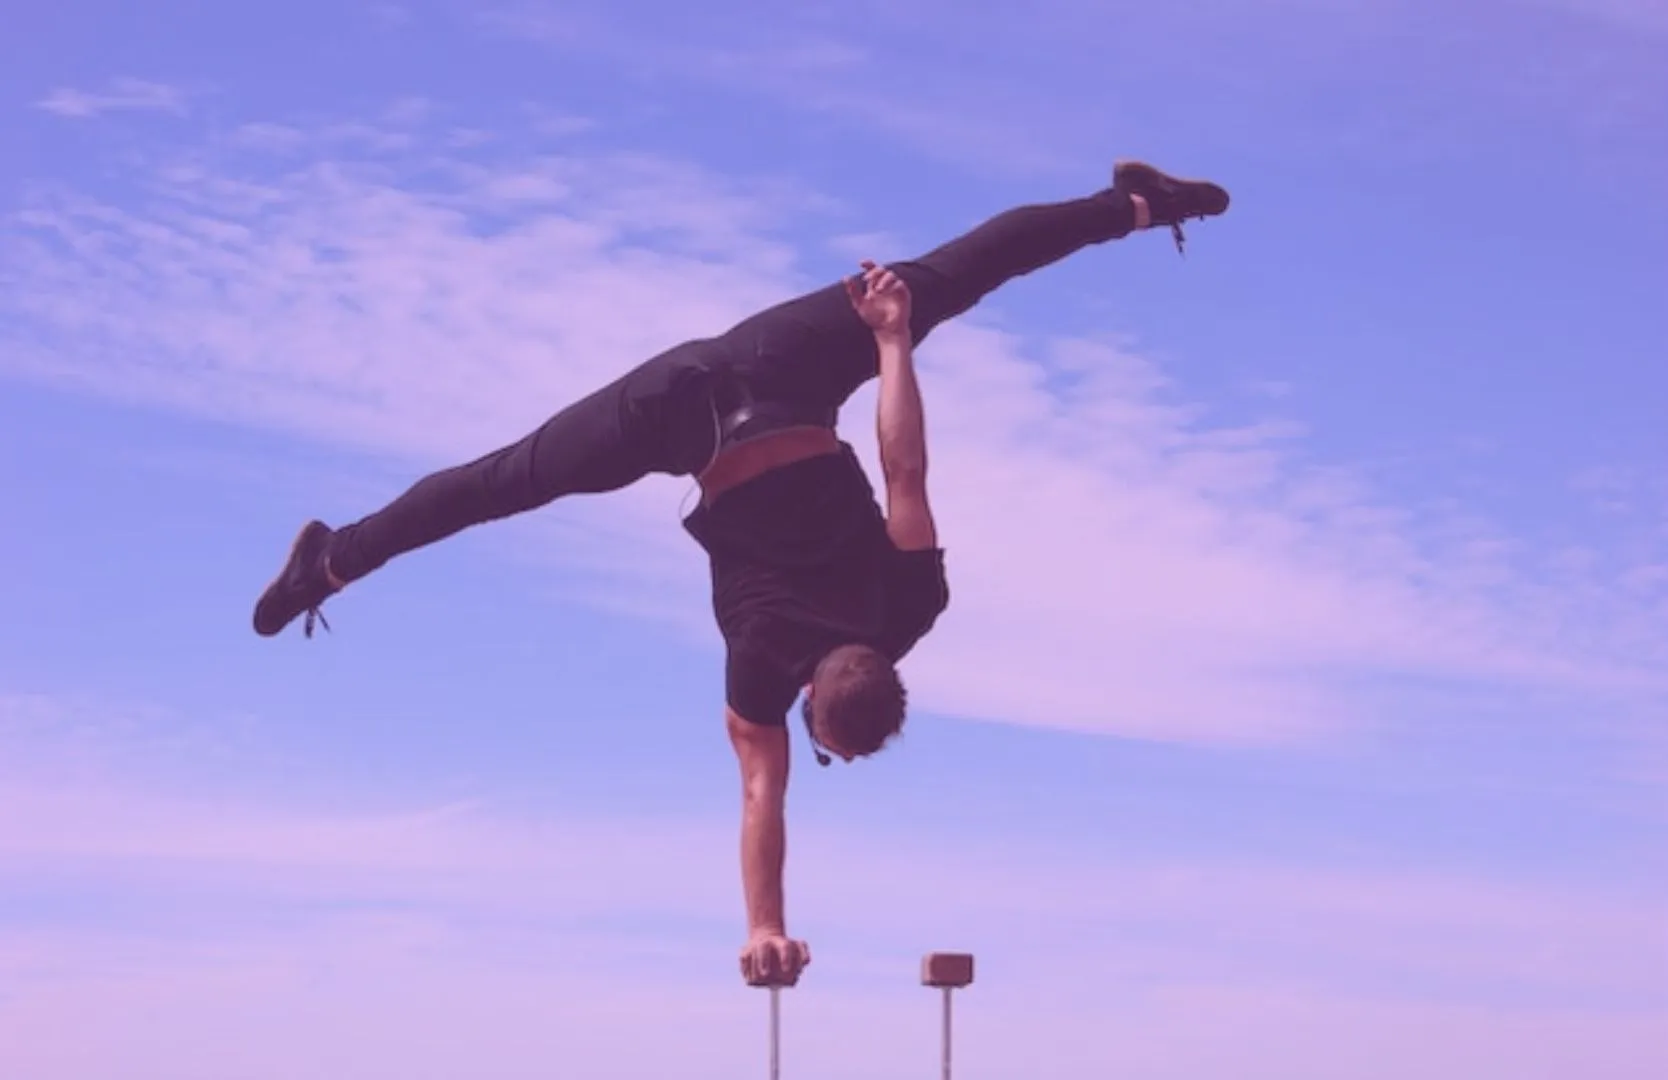 Man doing gymnastics in the air, represents the flexability needed for agile roadmapping